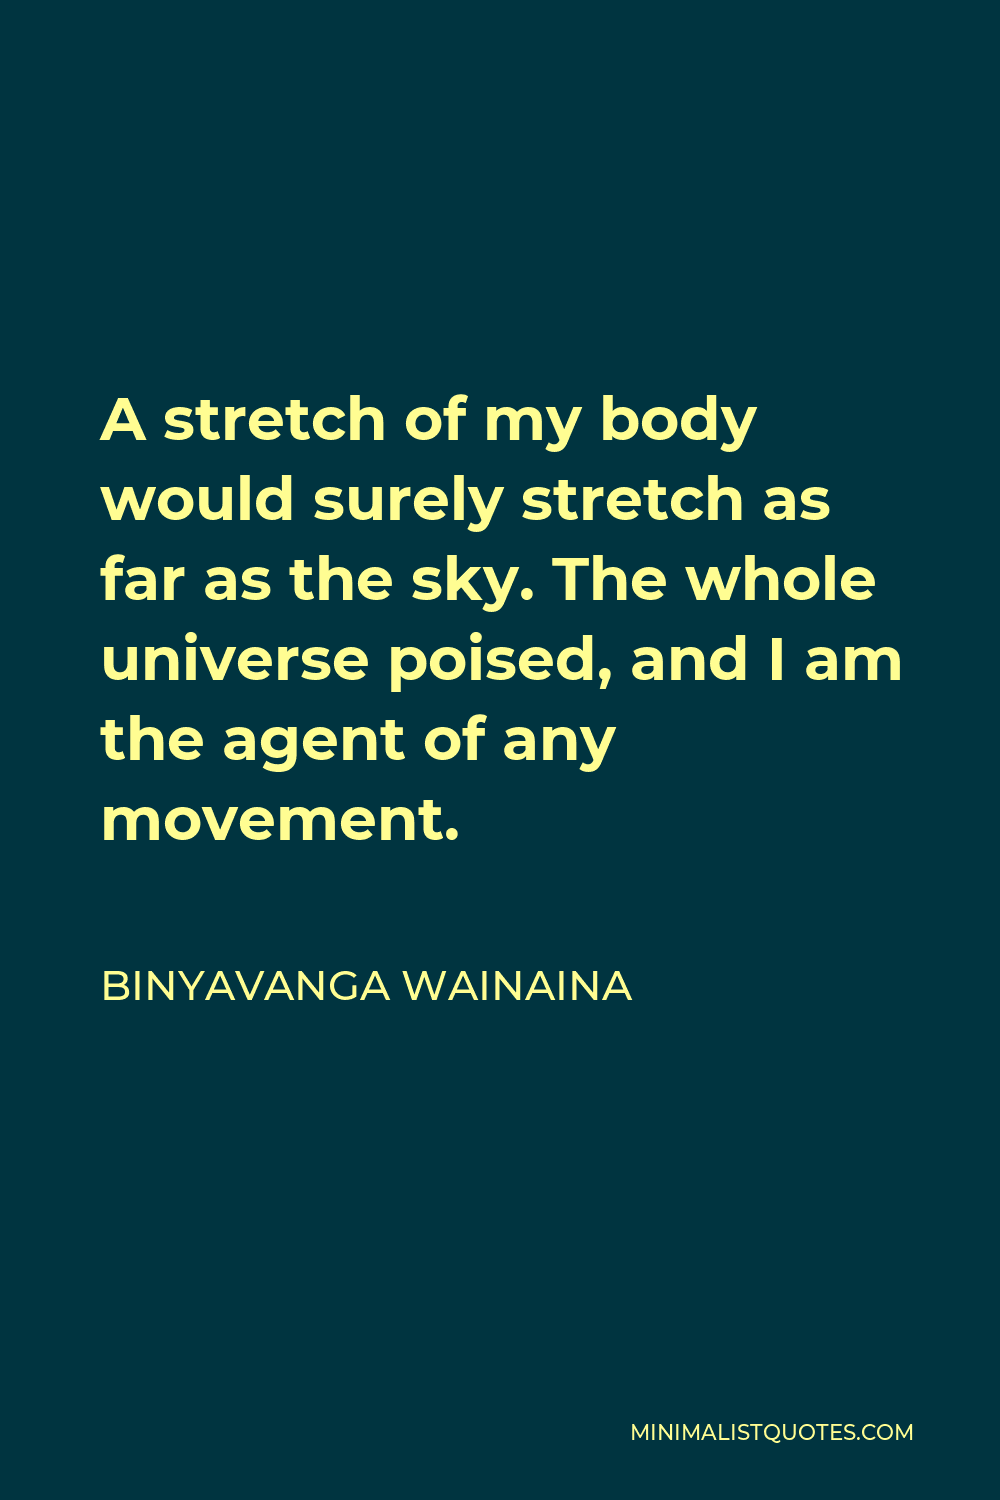 Binyavanga Wainaina Quote - A stretch of my body would surely stretch as far as the sky. The whole universe poised, and I am the agent of any movement.